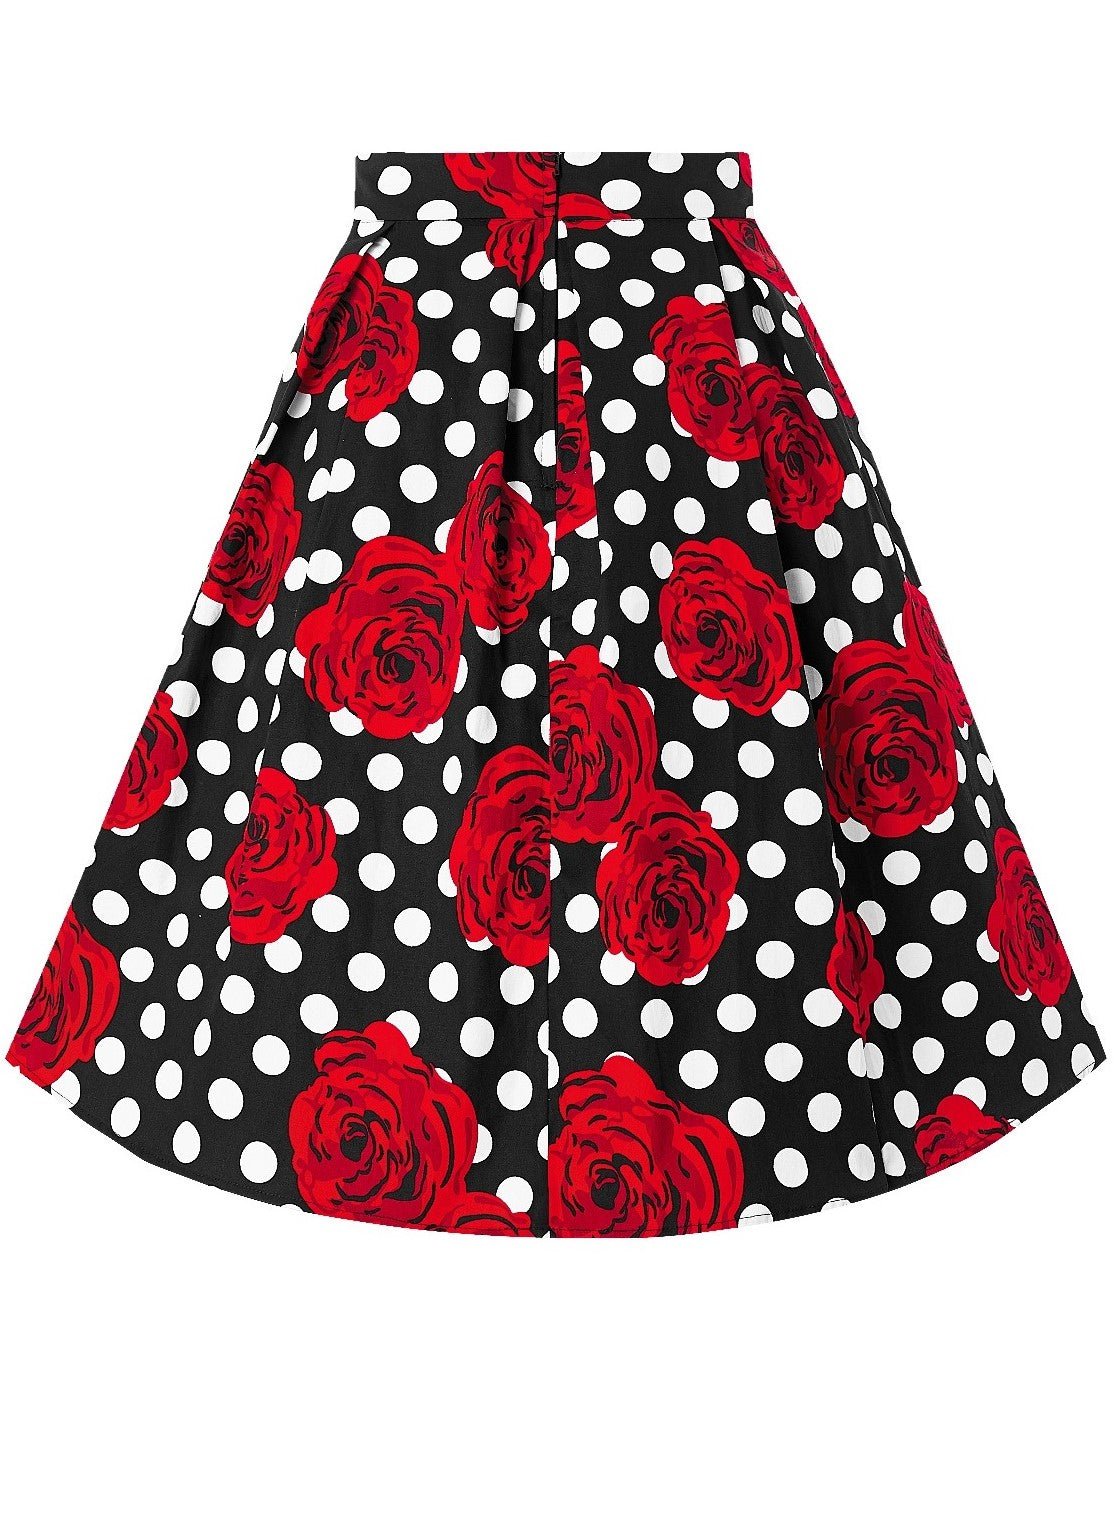 Carolyn Box Pleat Skirt in Black with Roses & White Polka Dots